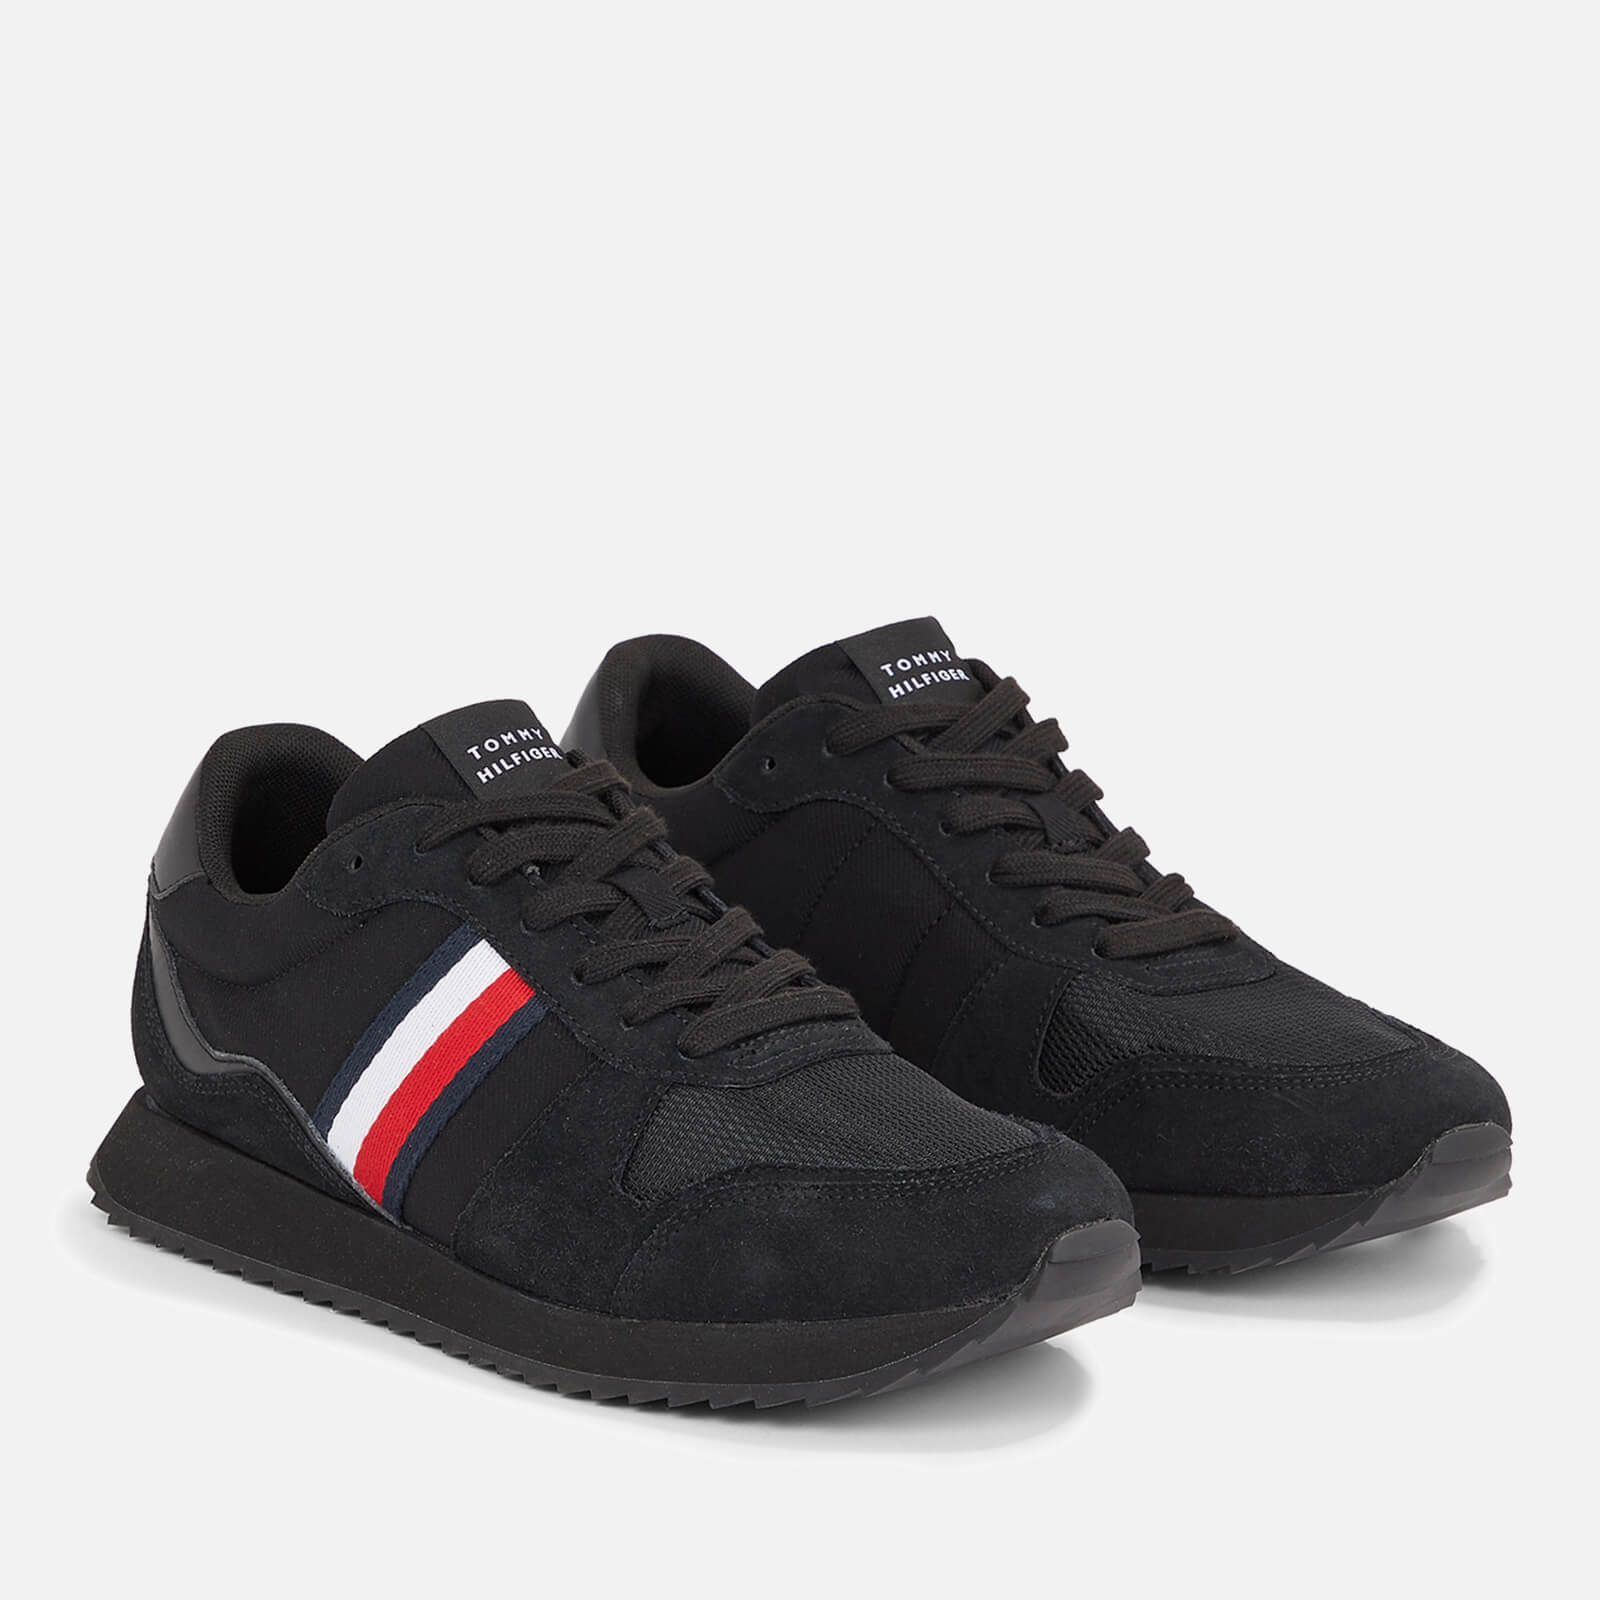 tommy hilfiger men's evo mix suede, leather and mesh trainers - uk 8